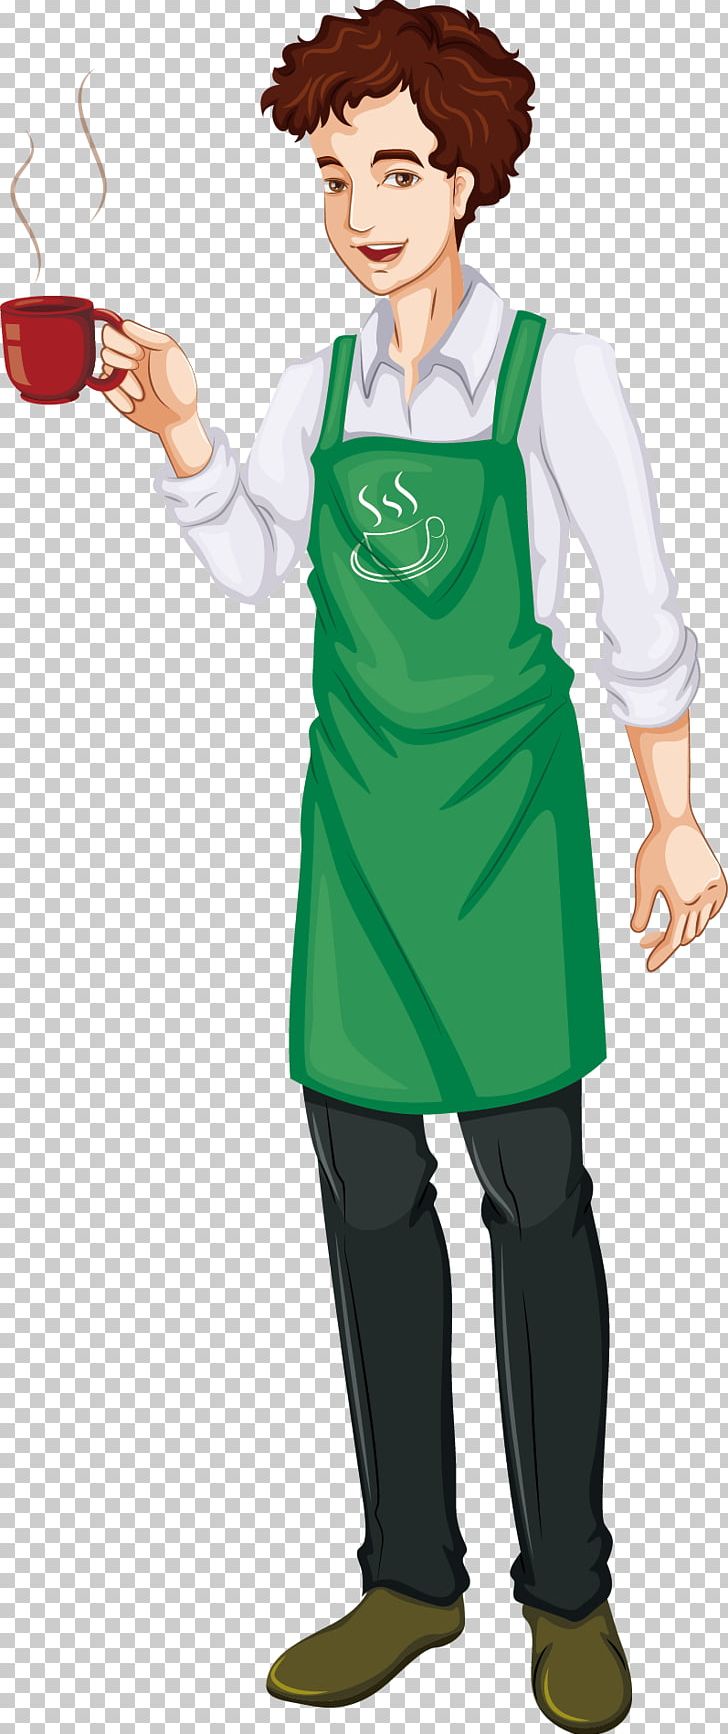 Cafe Drawing Waiter Illustration PNG, Clipart, Boy, Business Man, Cartoon, Child, Coffee Free PNG Download